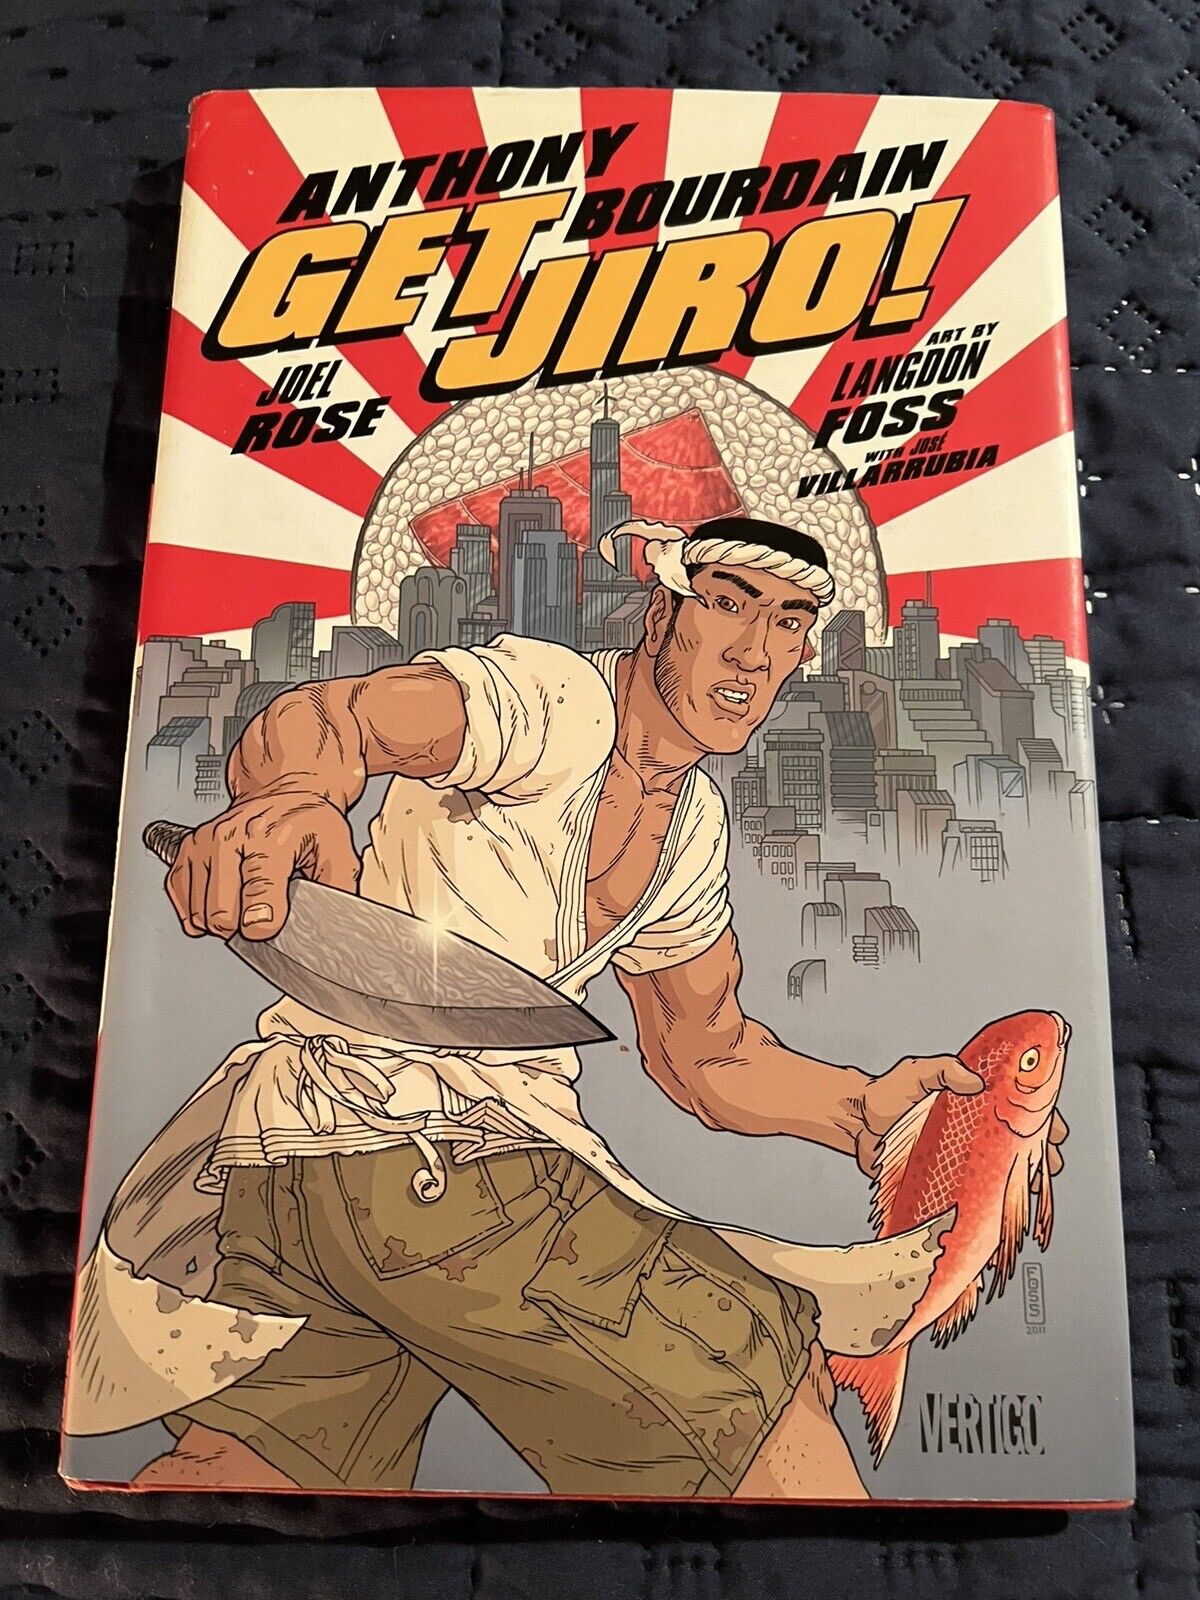 Get Jiro by Anthony Bourdain and Joel Rose, hard cover